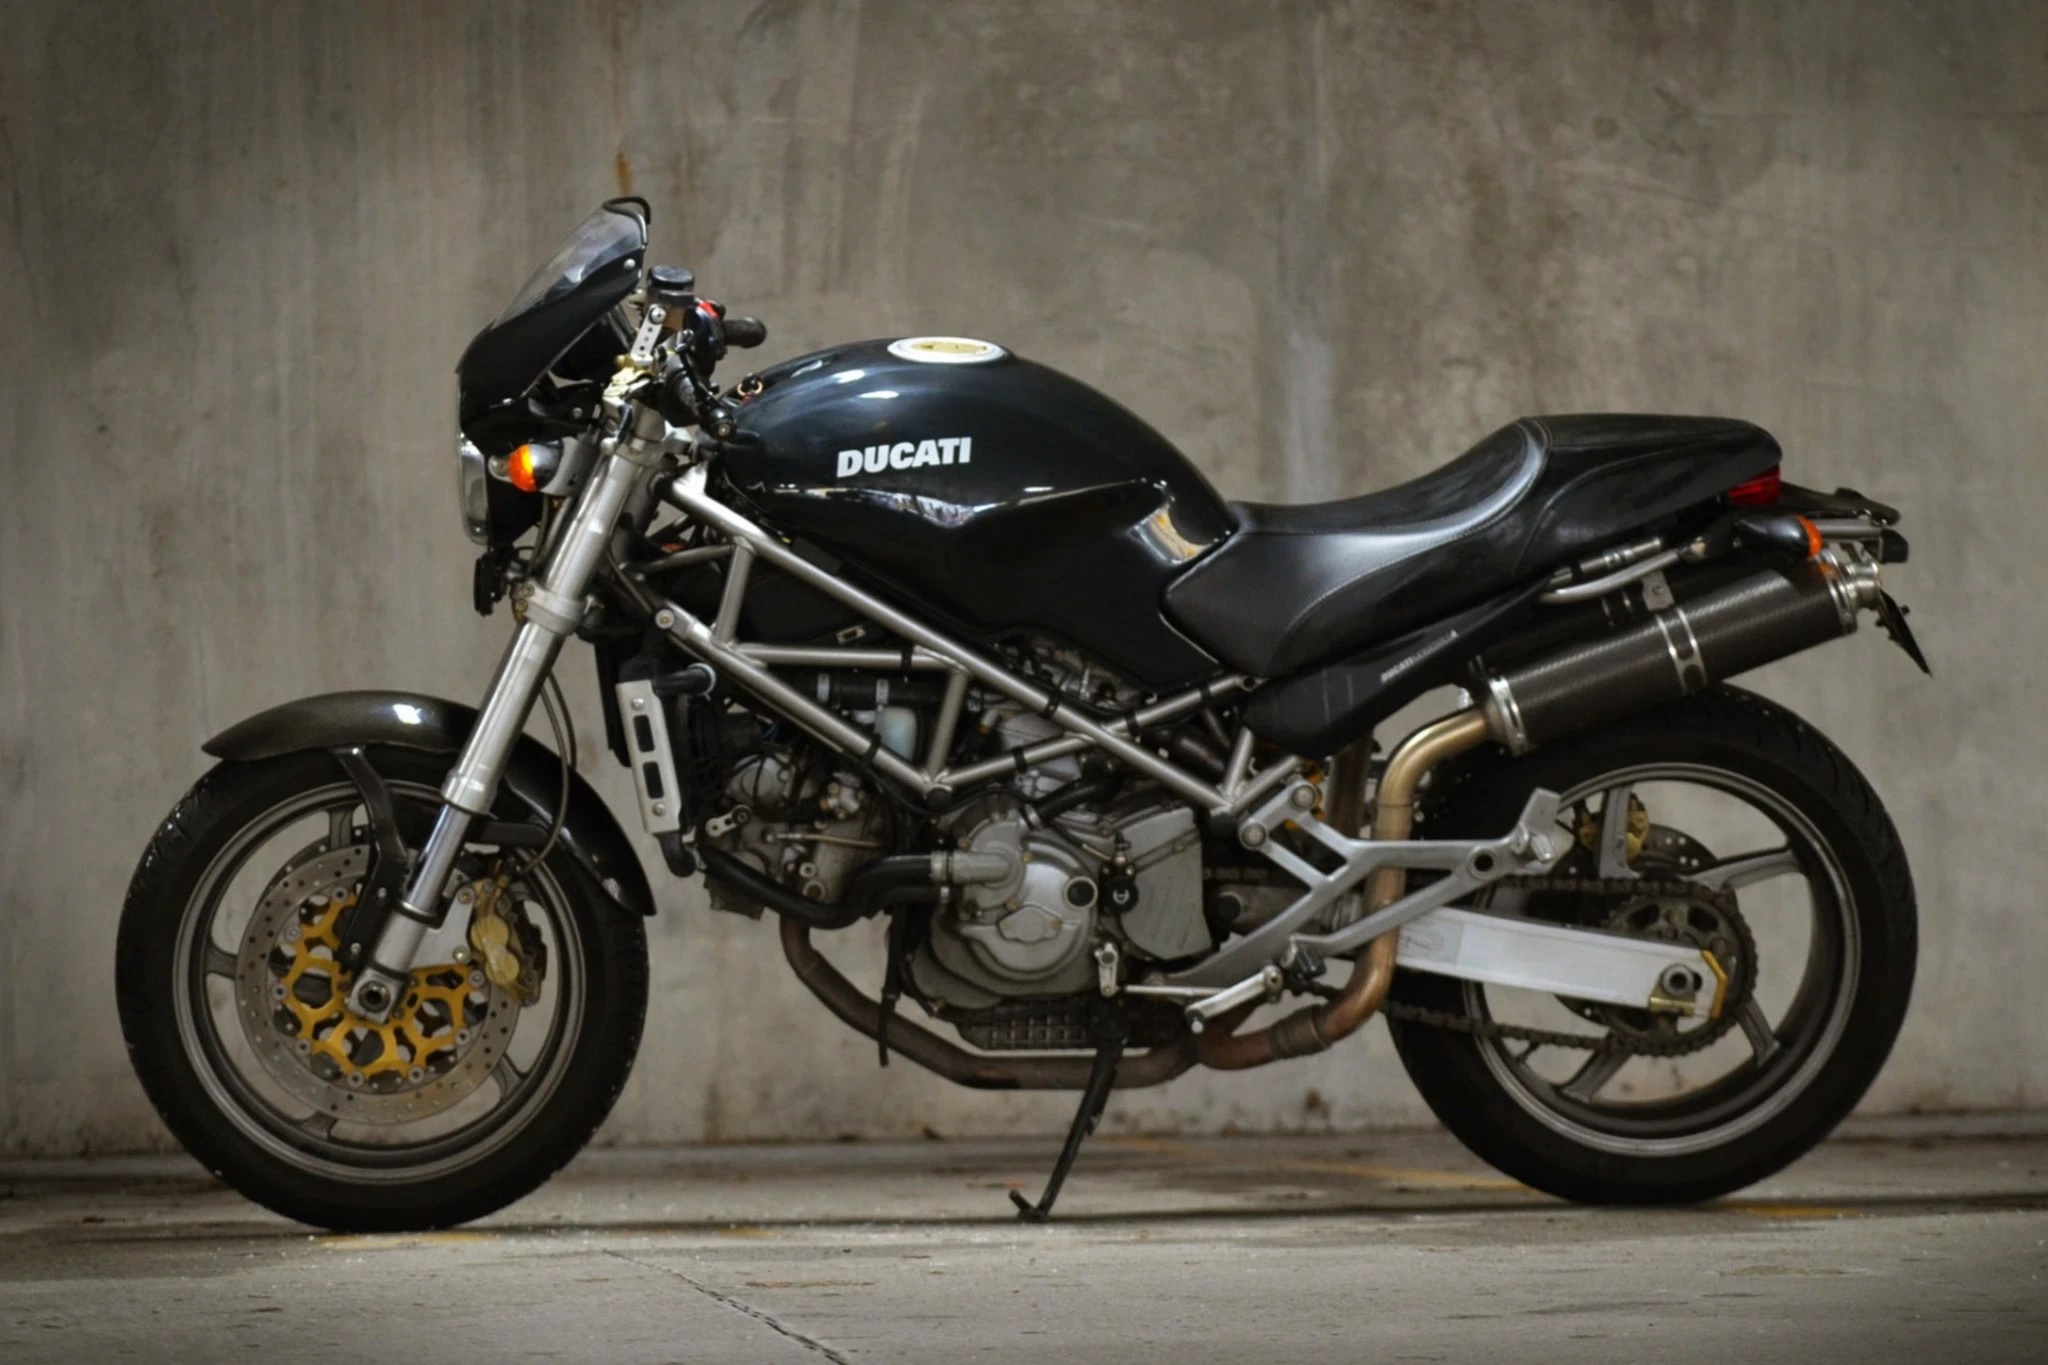 Black 2002 Ducati Monster S4, viewed from the side, in a concrete parking garage